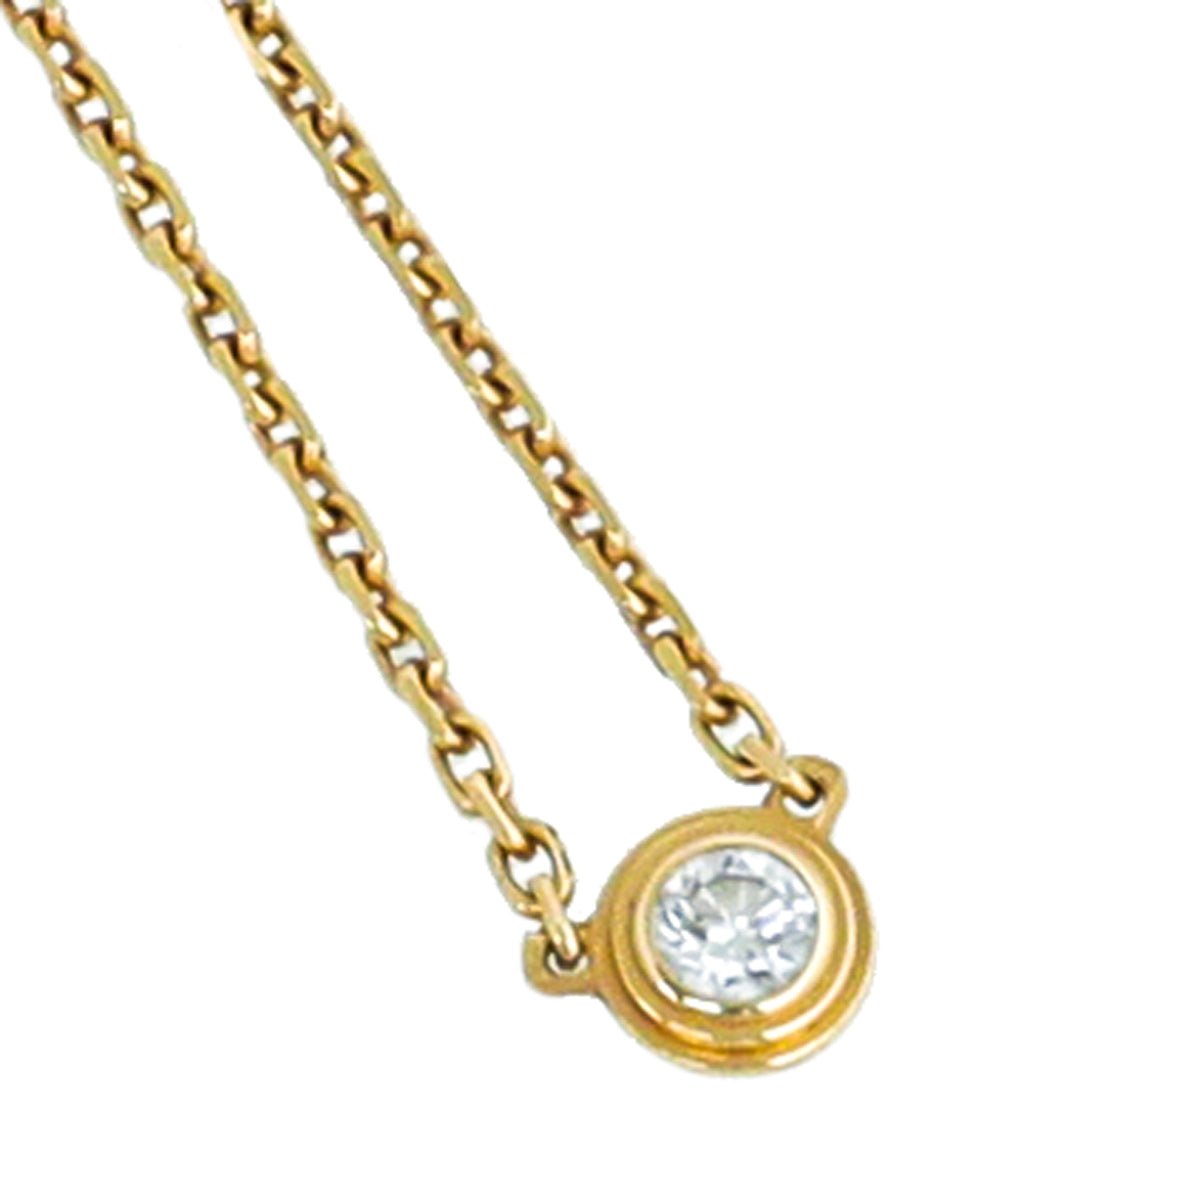 Cartier d'Amour necklace XS yellow gold | eBay